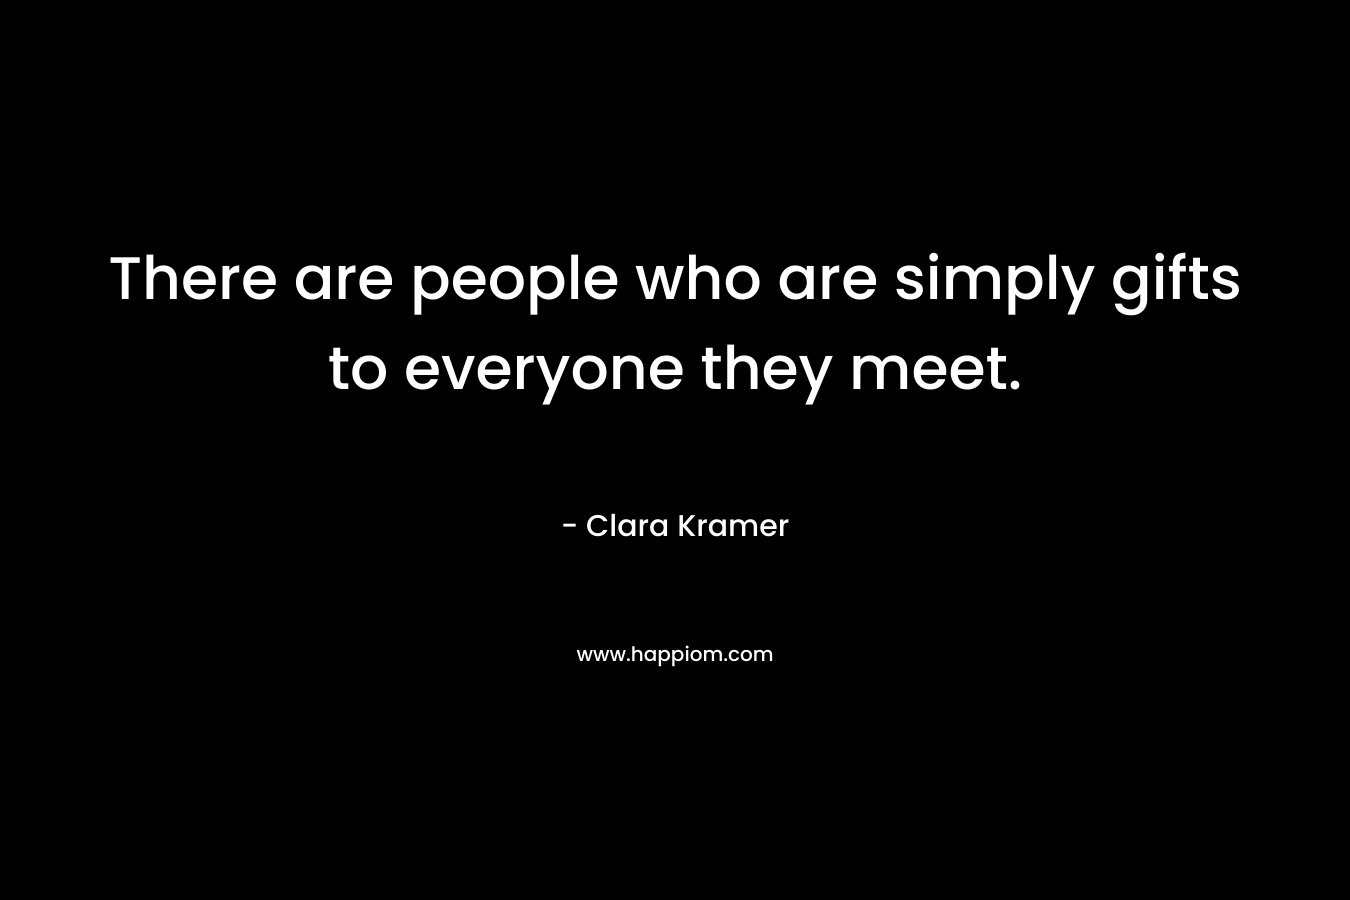 There are people who are simply gifts to everyone they meet.